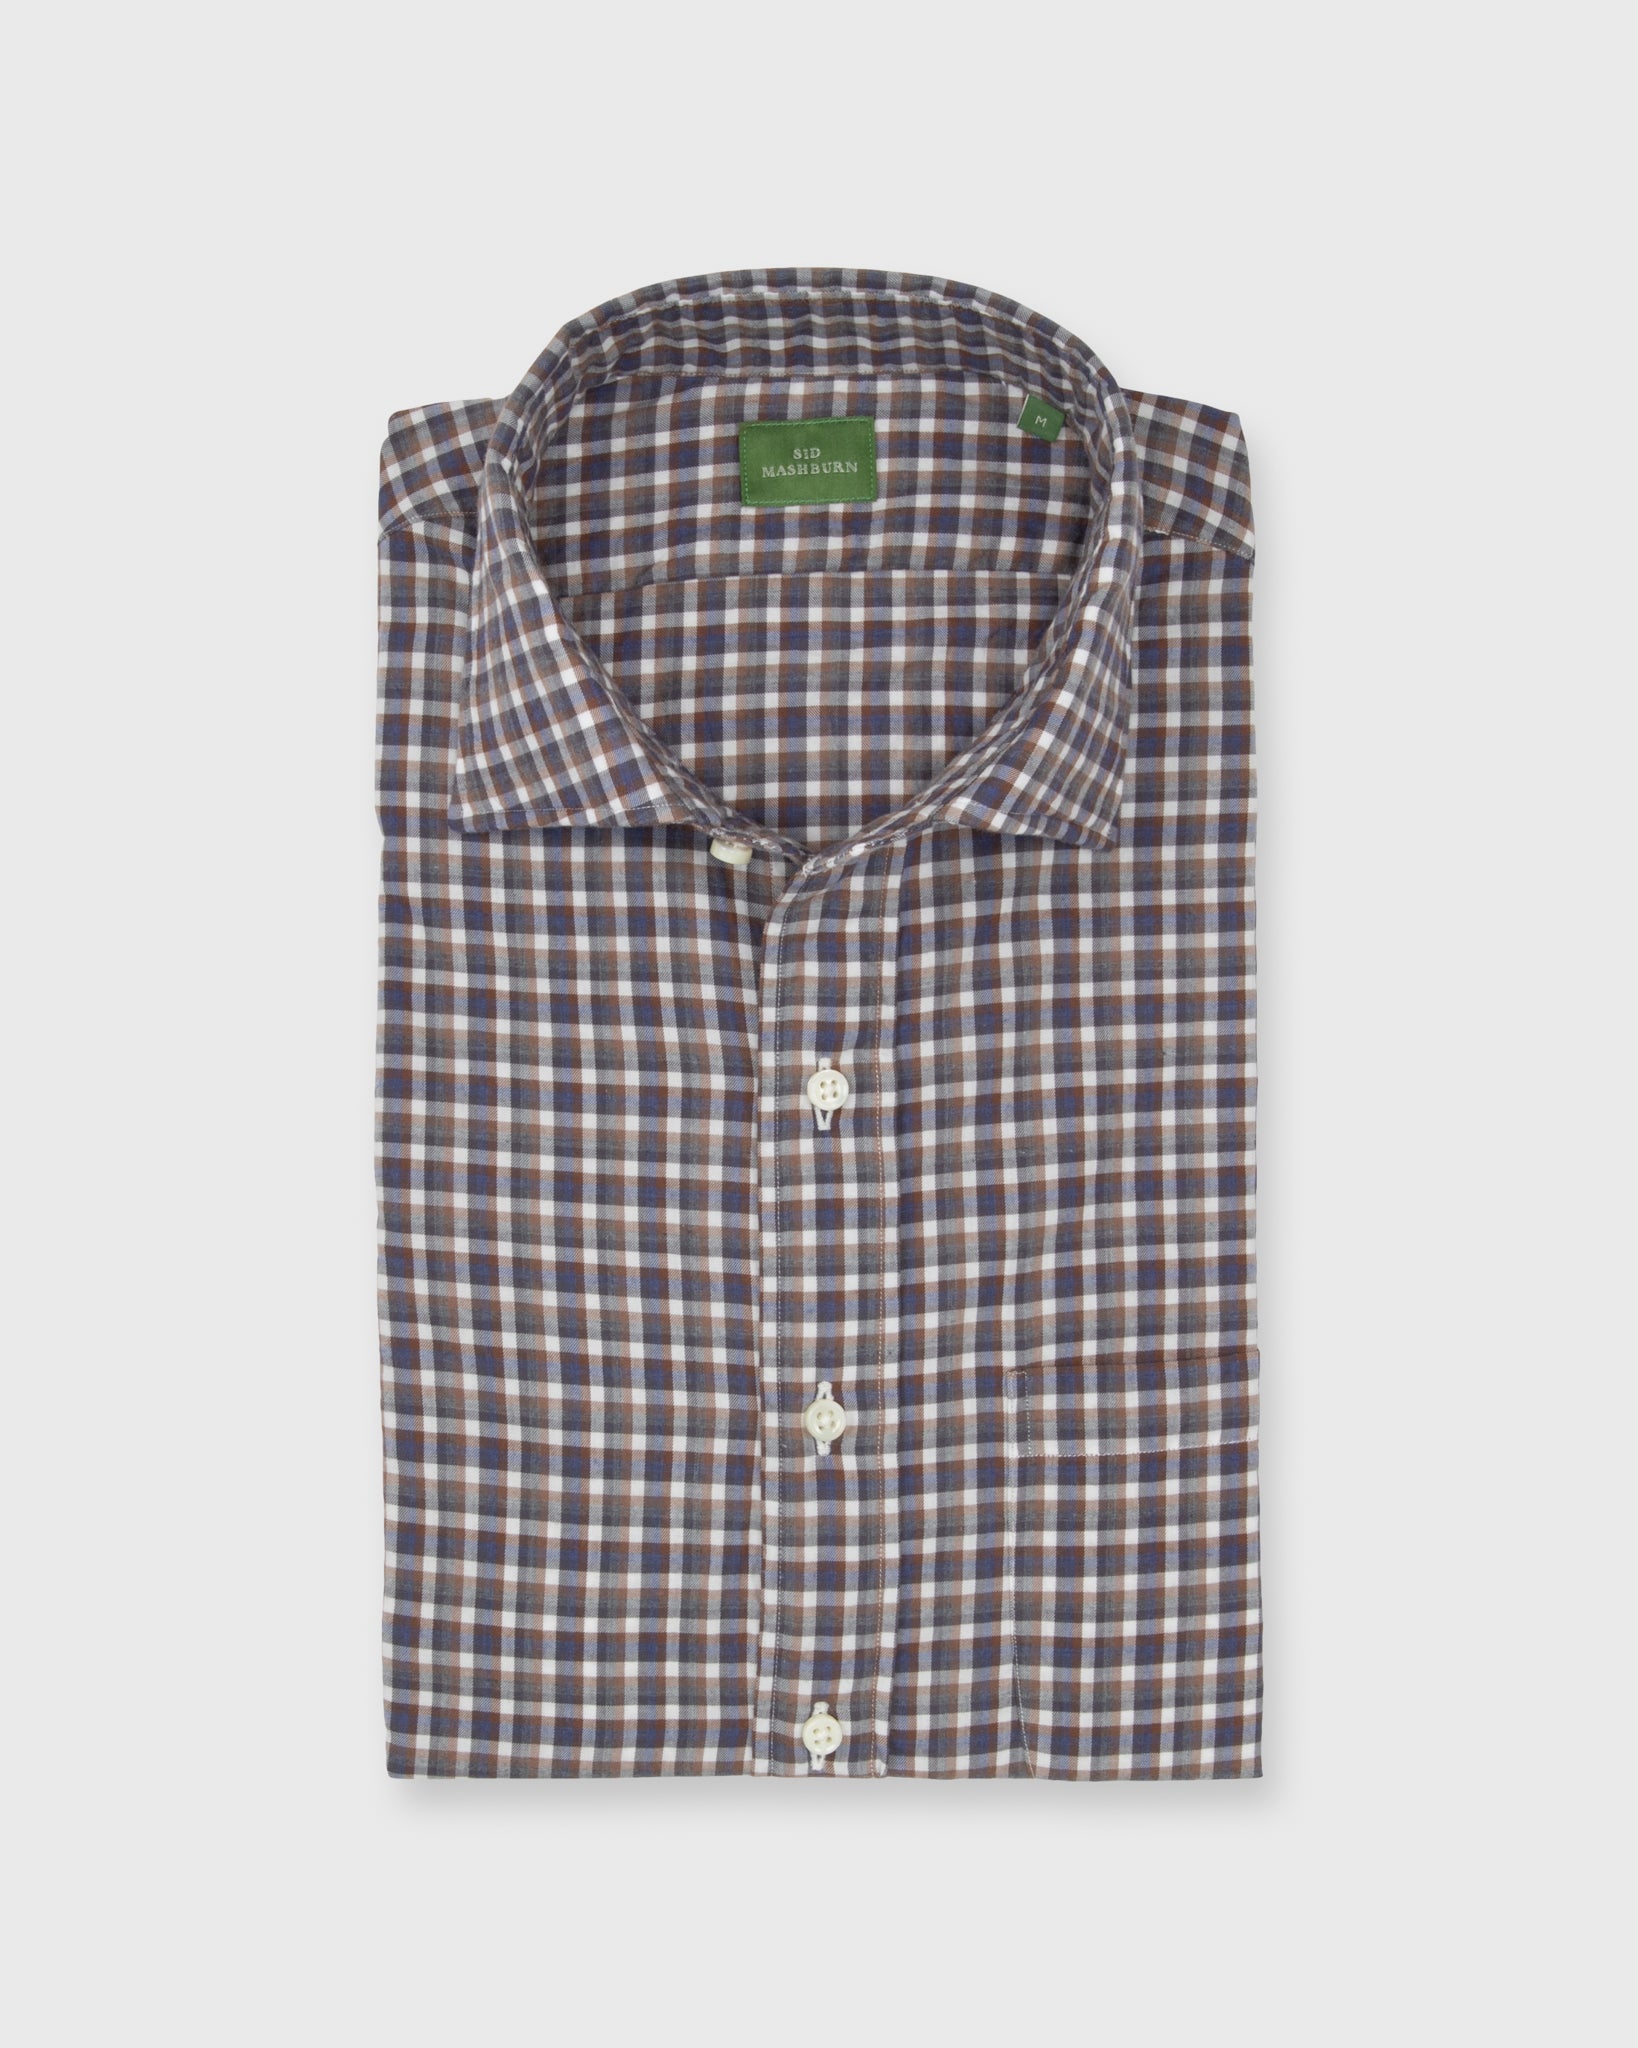 Spread Collar Sport Shirt in Grey/Cobalt/Brown Check Brushed Twill